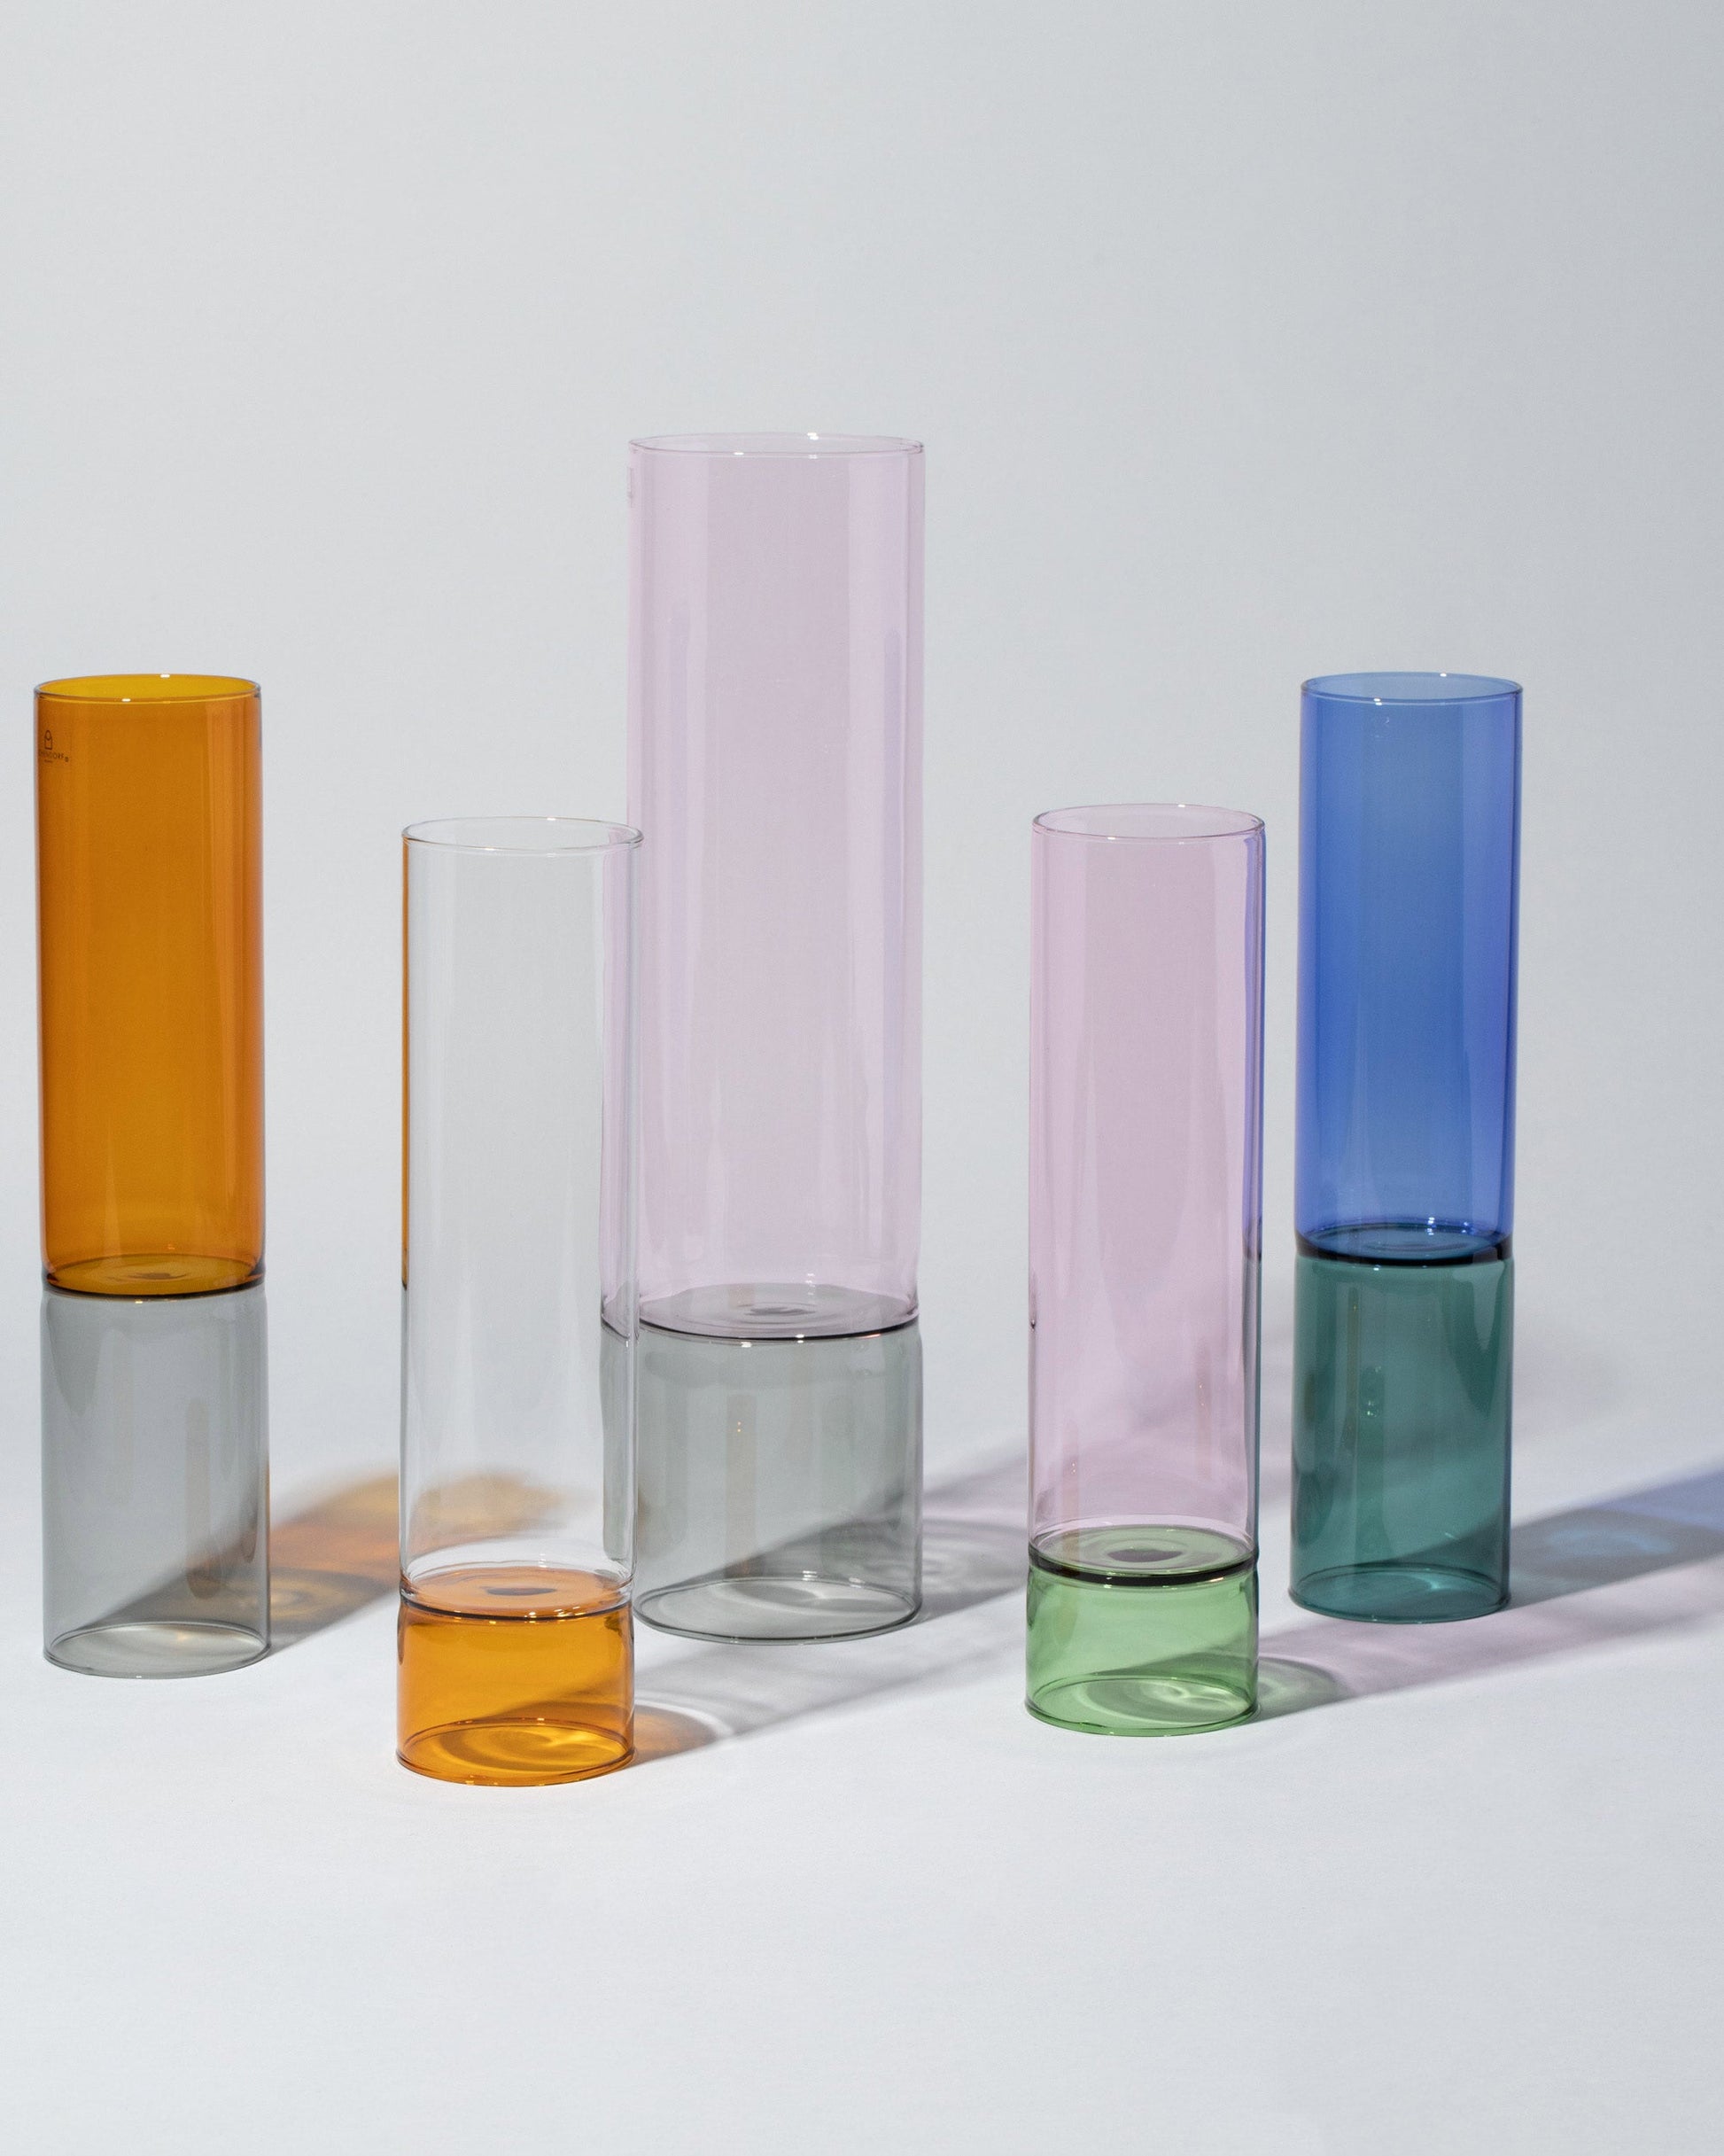 Group of Ichendorf Milano Medium Amber/Smoke, Small Pink/Green, Large Pink/Smoke, Small Clear/Amber and Medium Blue/Green Bamboo Vases on light color background.